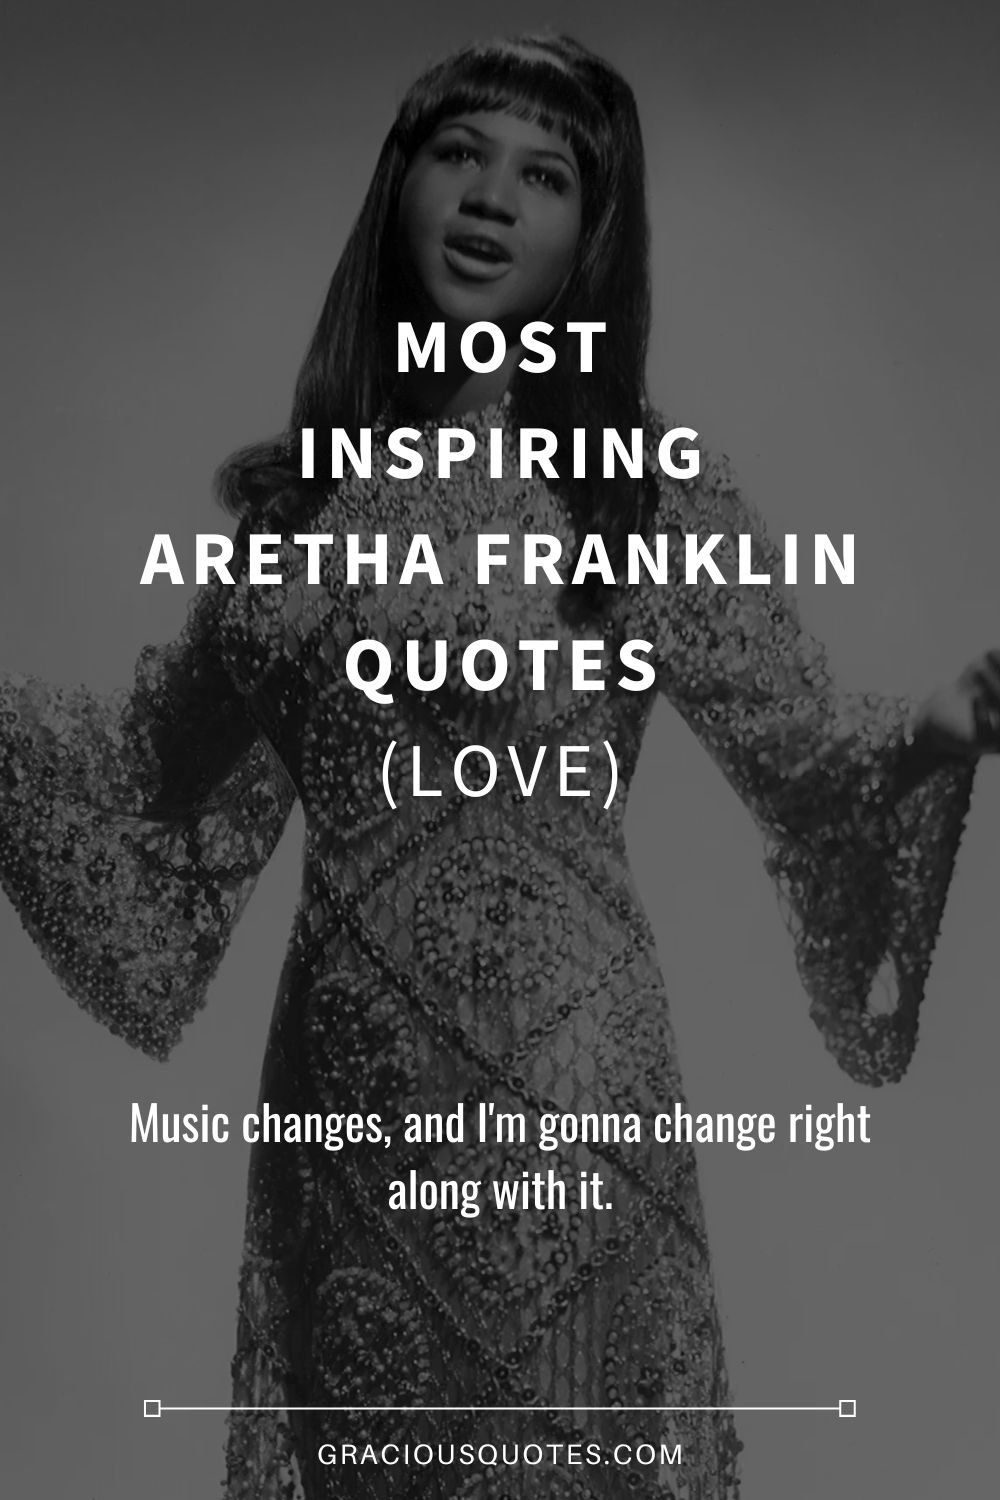 Most Inspiring Aretha Franklin Quotes (LOVE) - Gracious Quotes